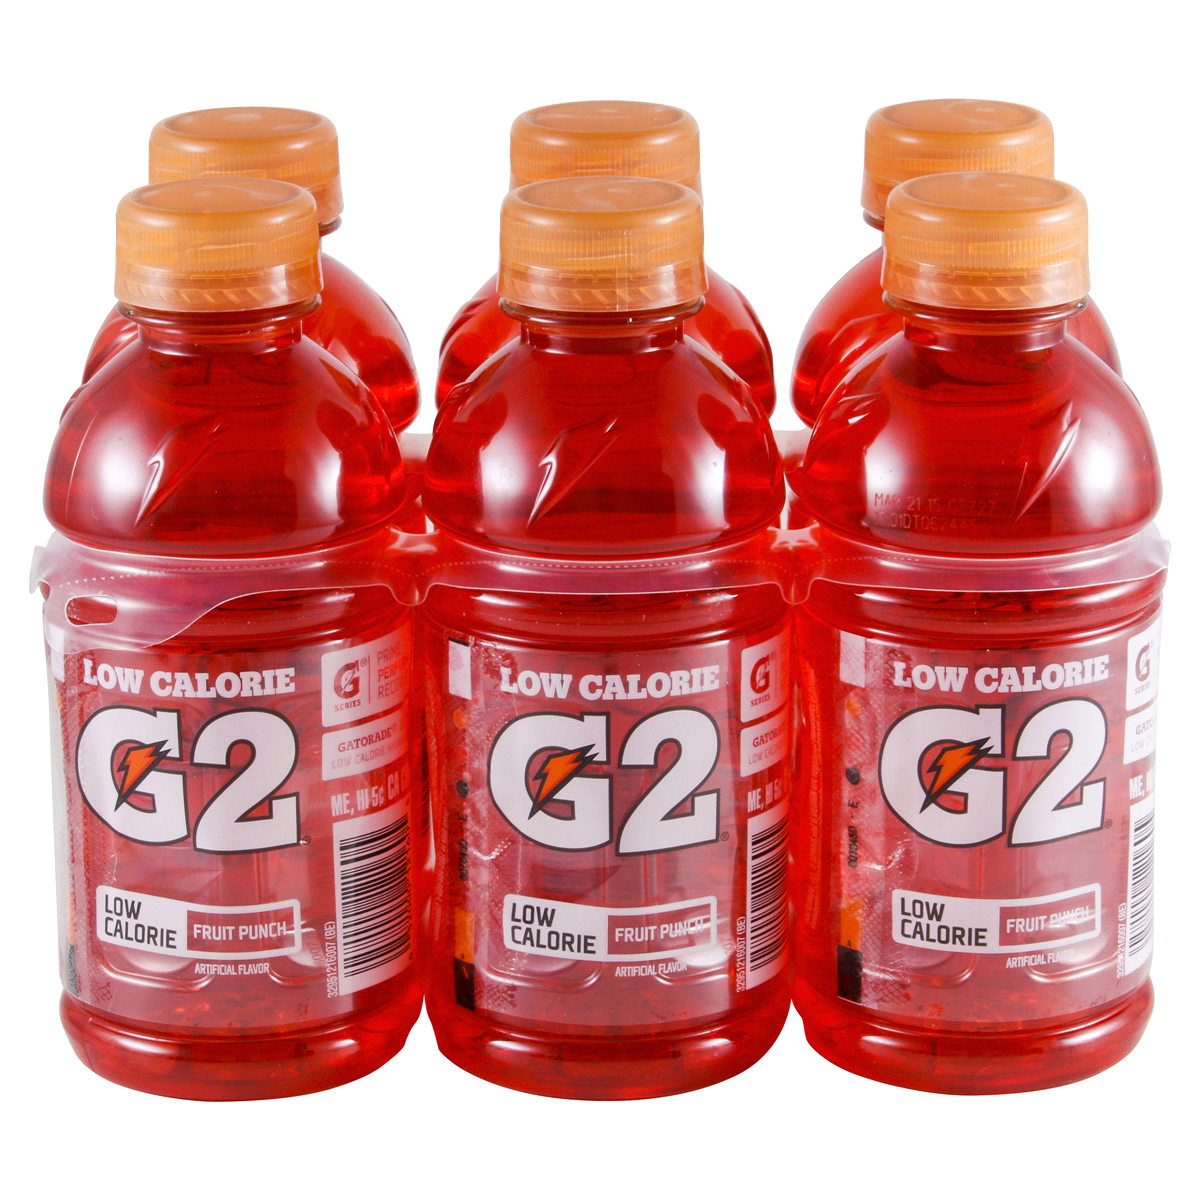 Why is there no Gatorade in the grocery stores